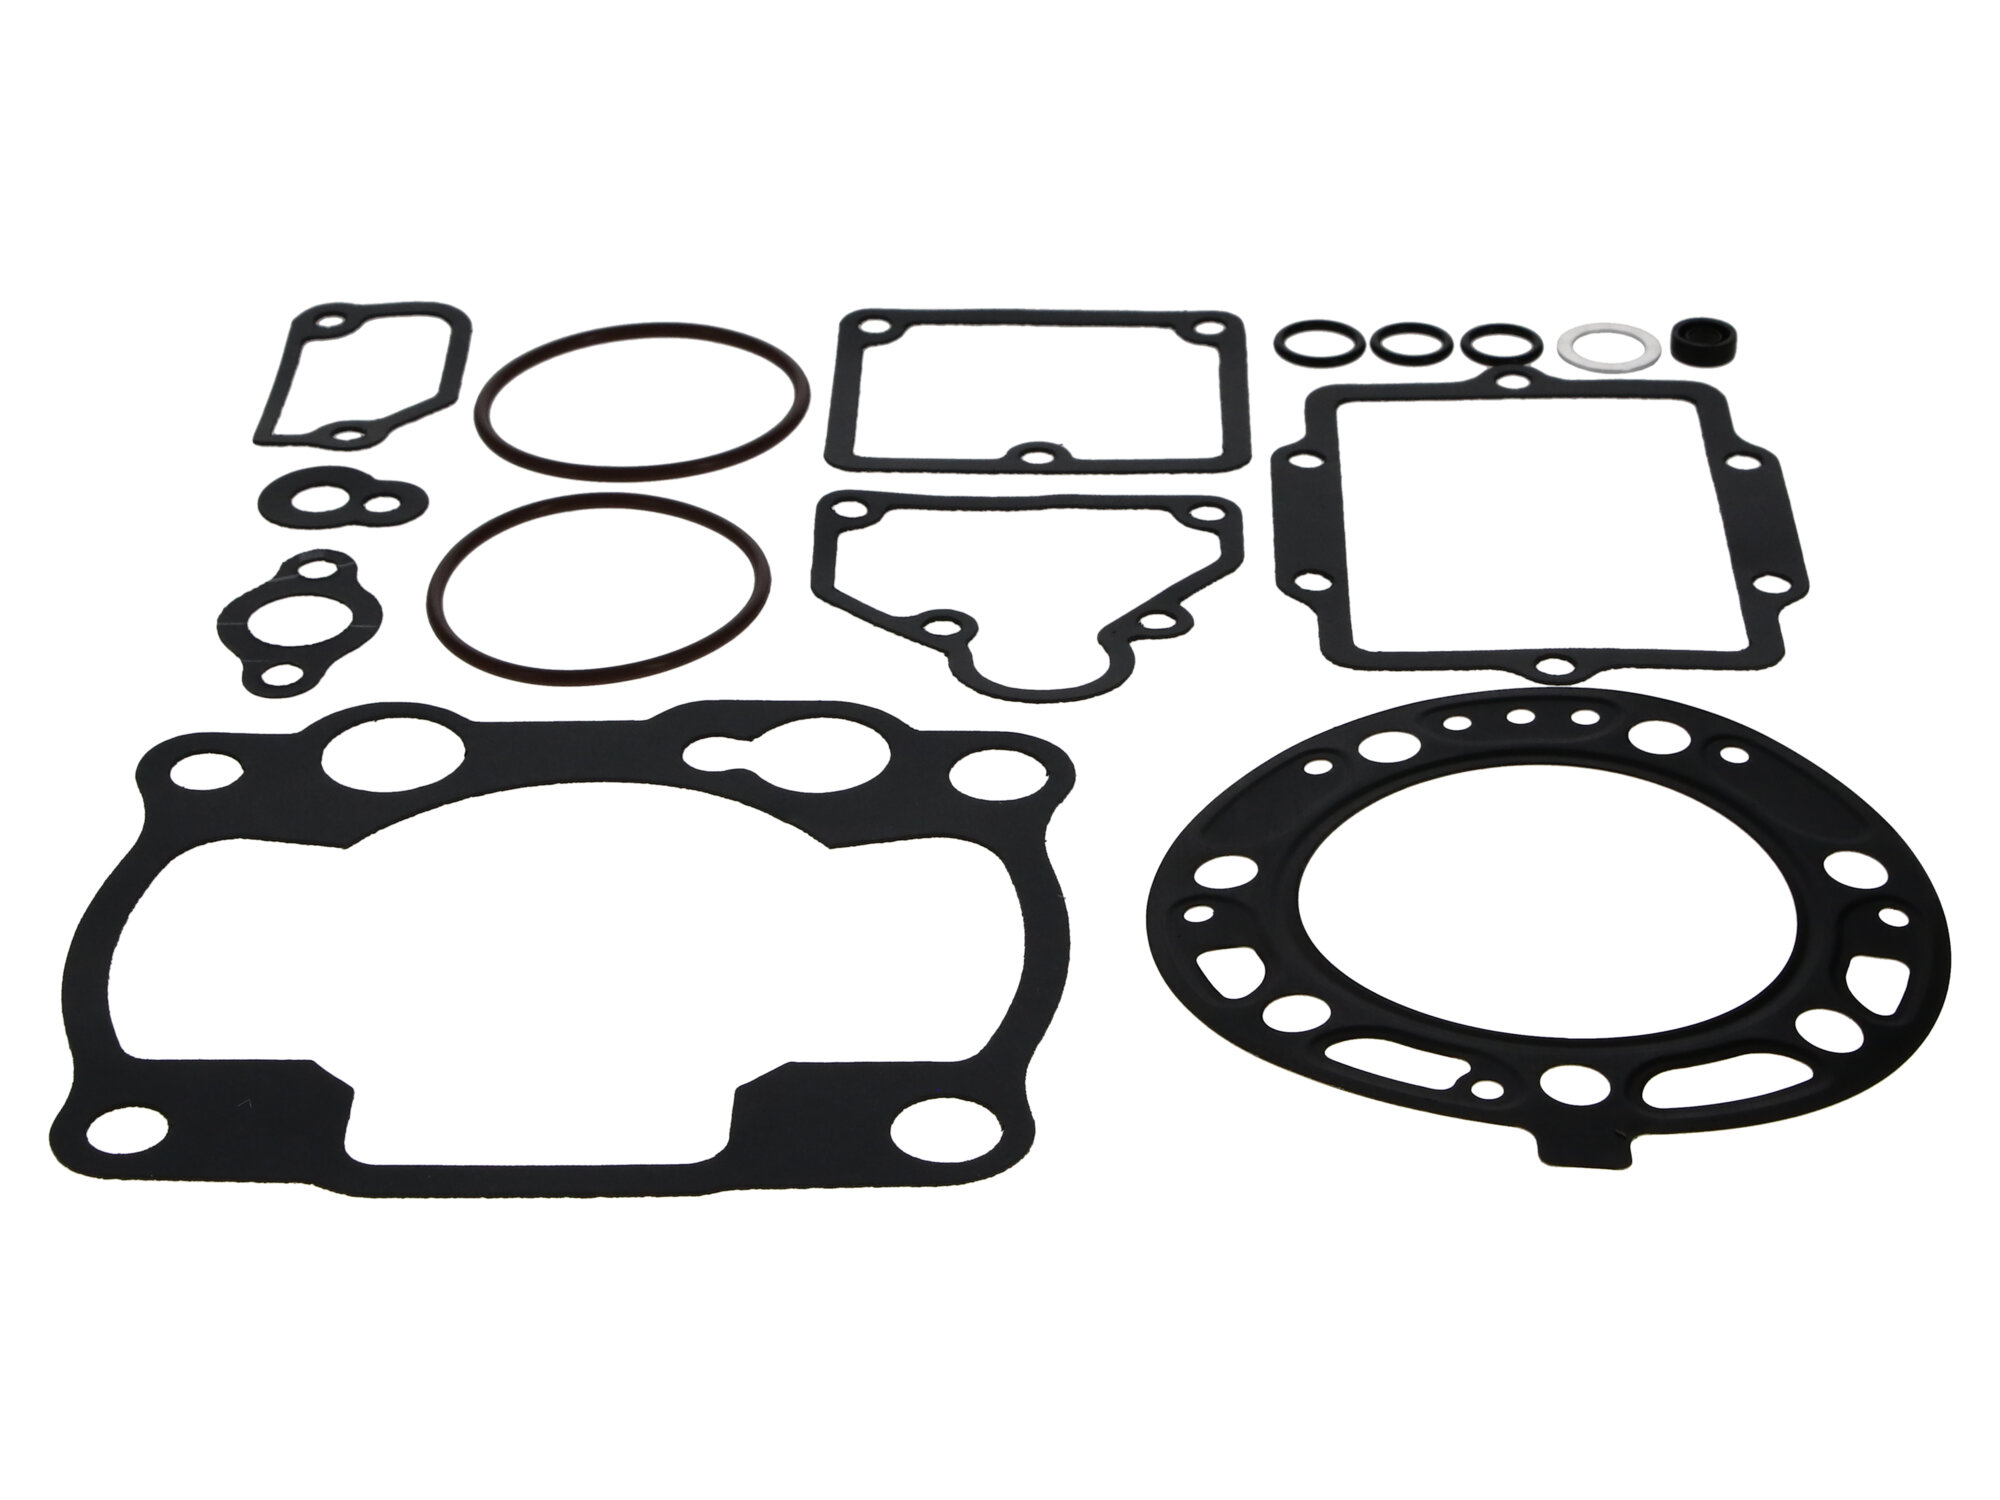 Shop High Quality Wiseco Top End Gasket Kit Top End Gasket Kits - Wiseco  SKU W5354